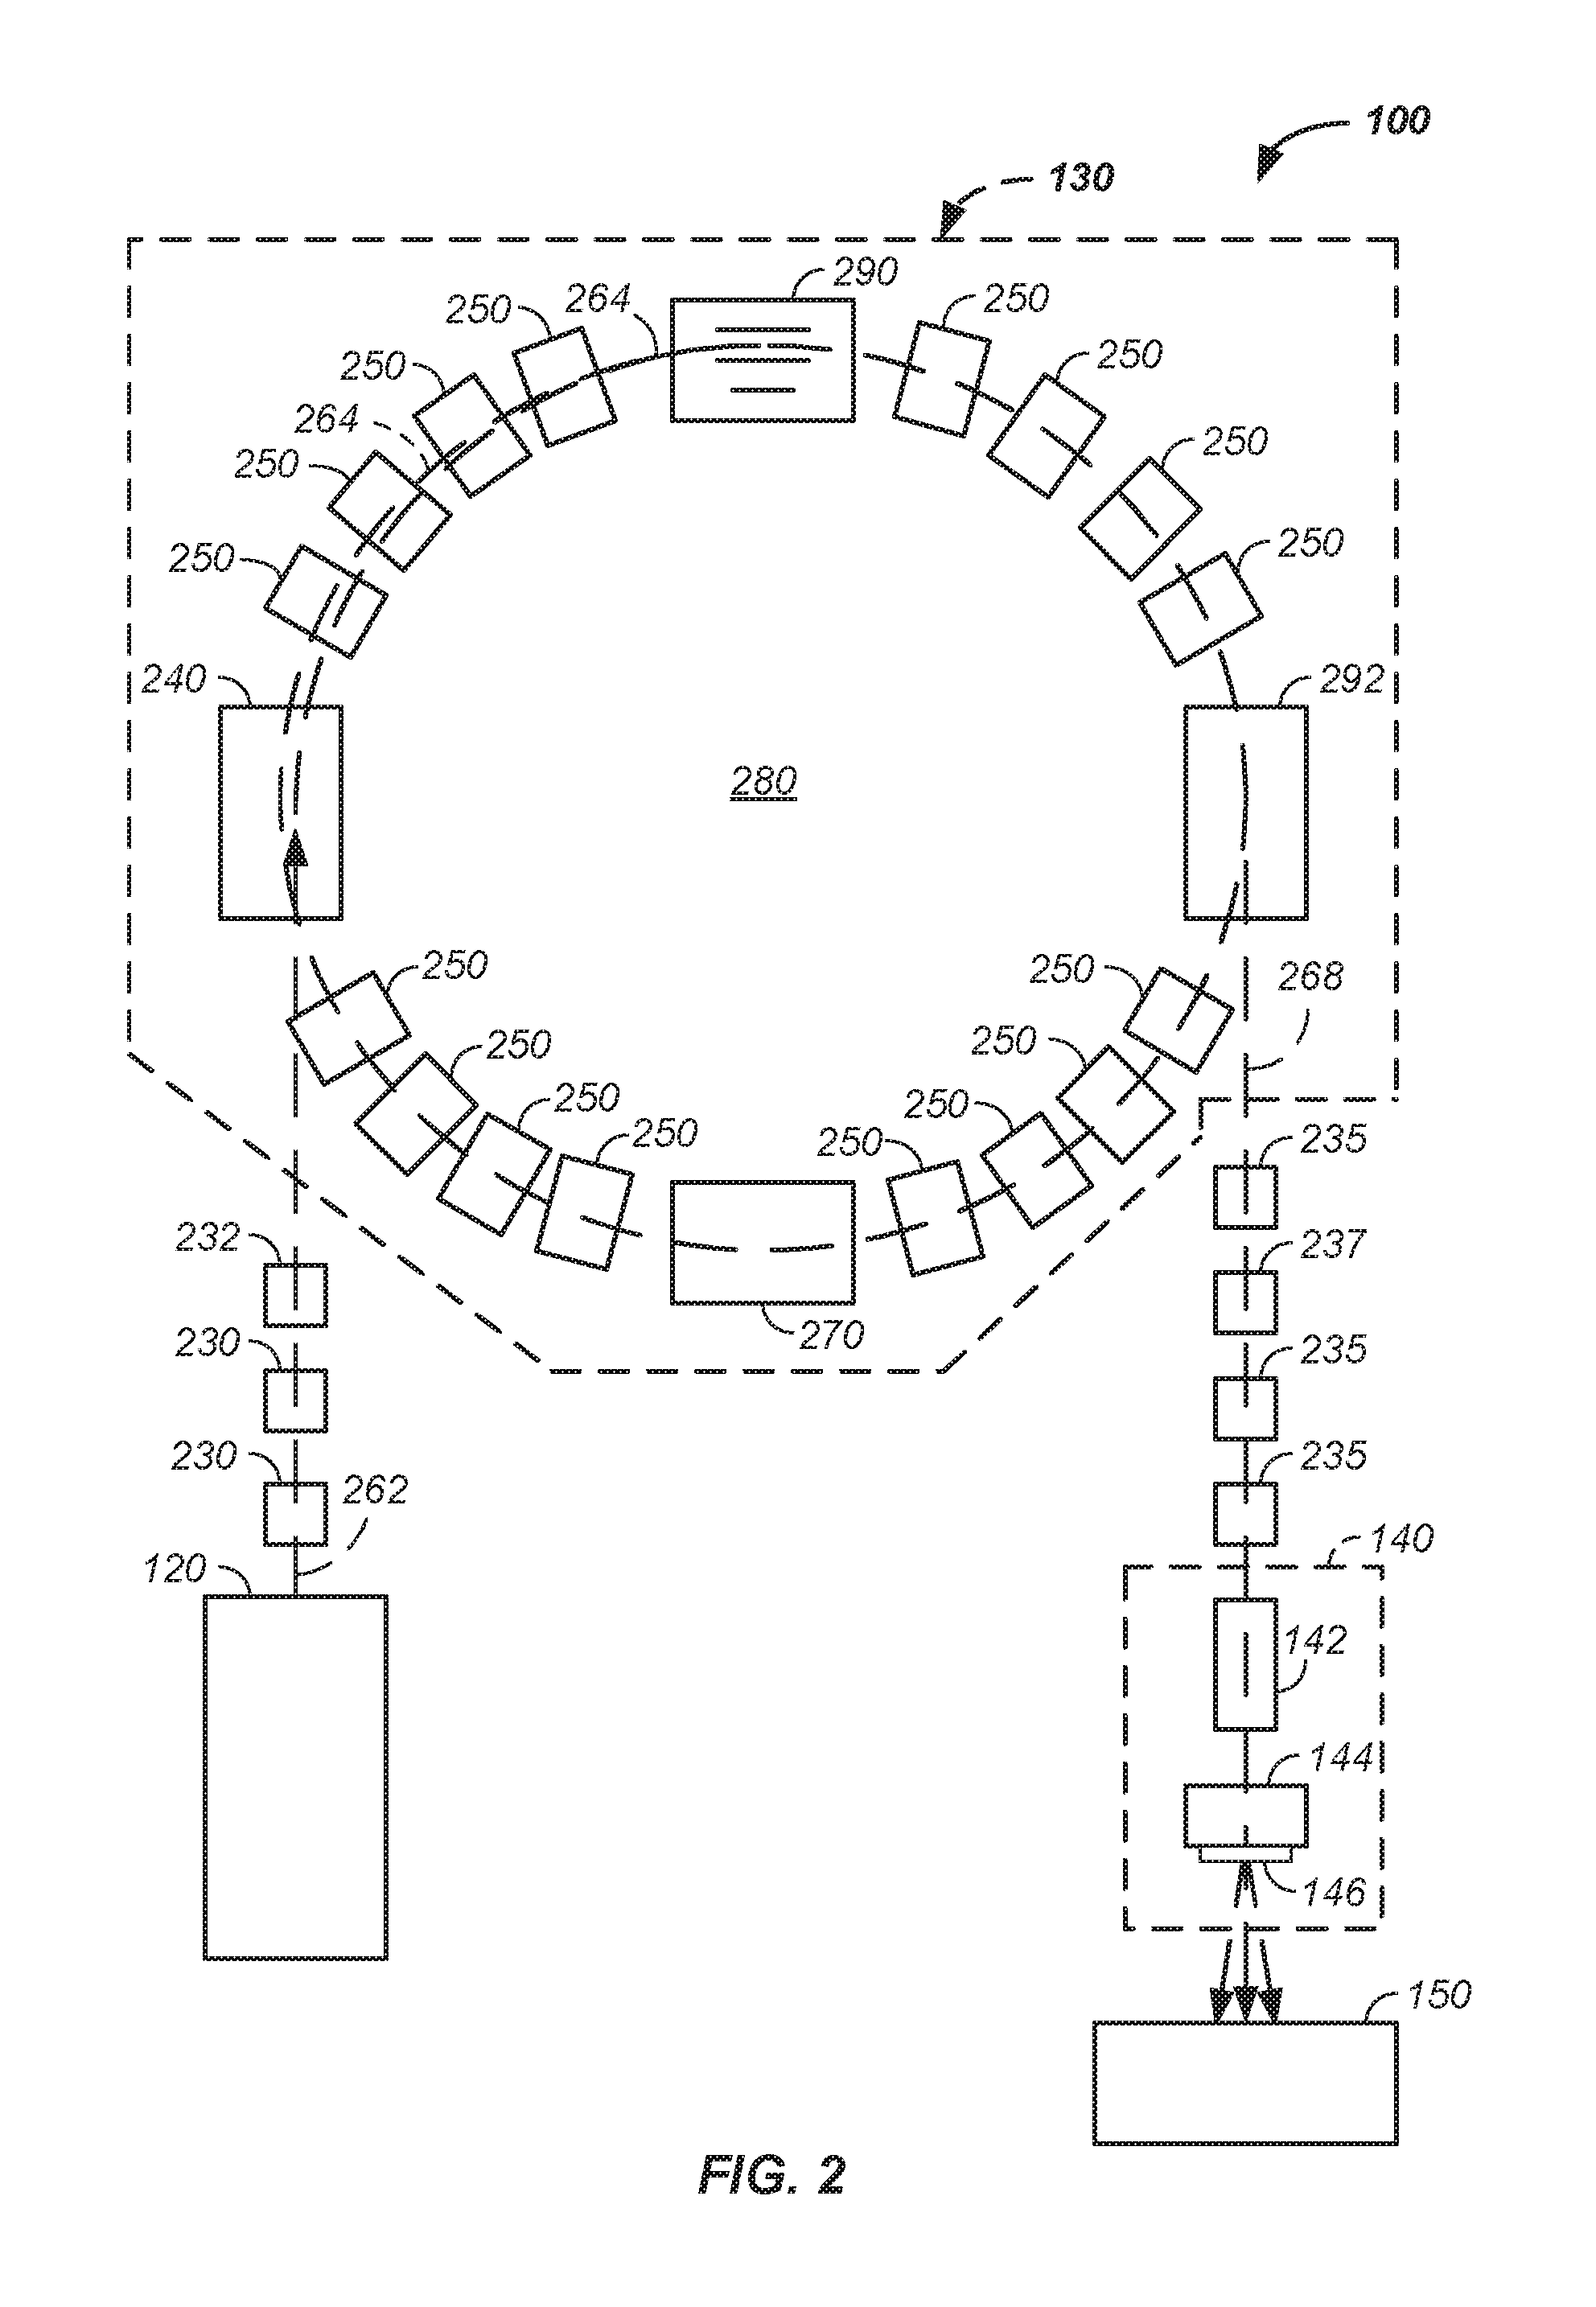 Imaging assisted integrated tomography - cancer treatment apparatus and method of use thereof